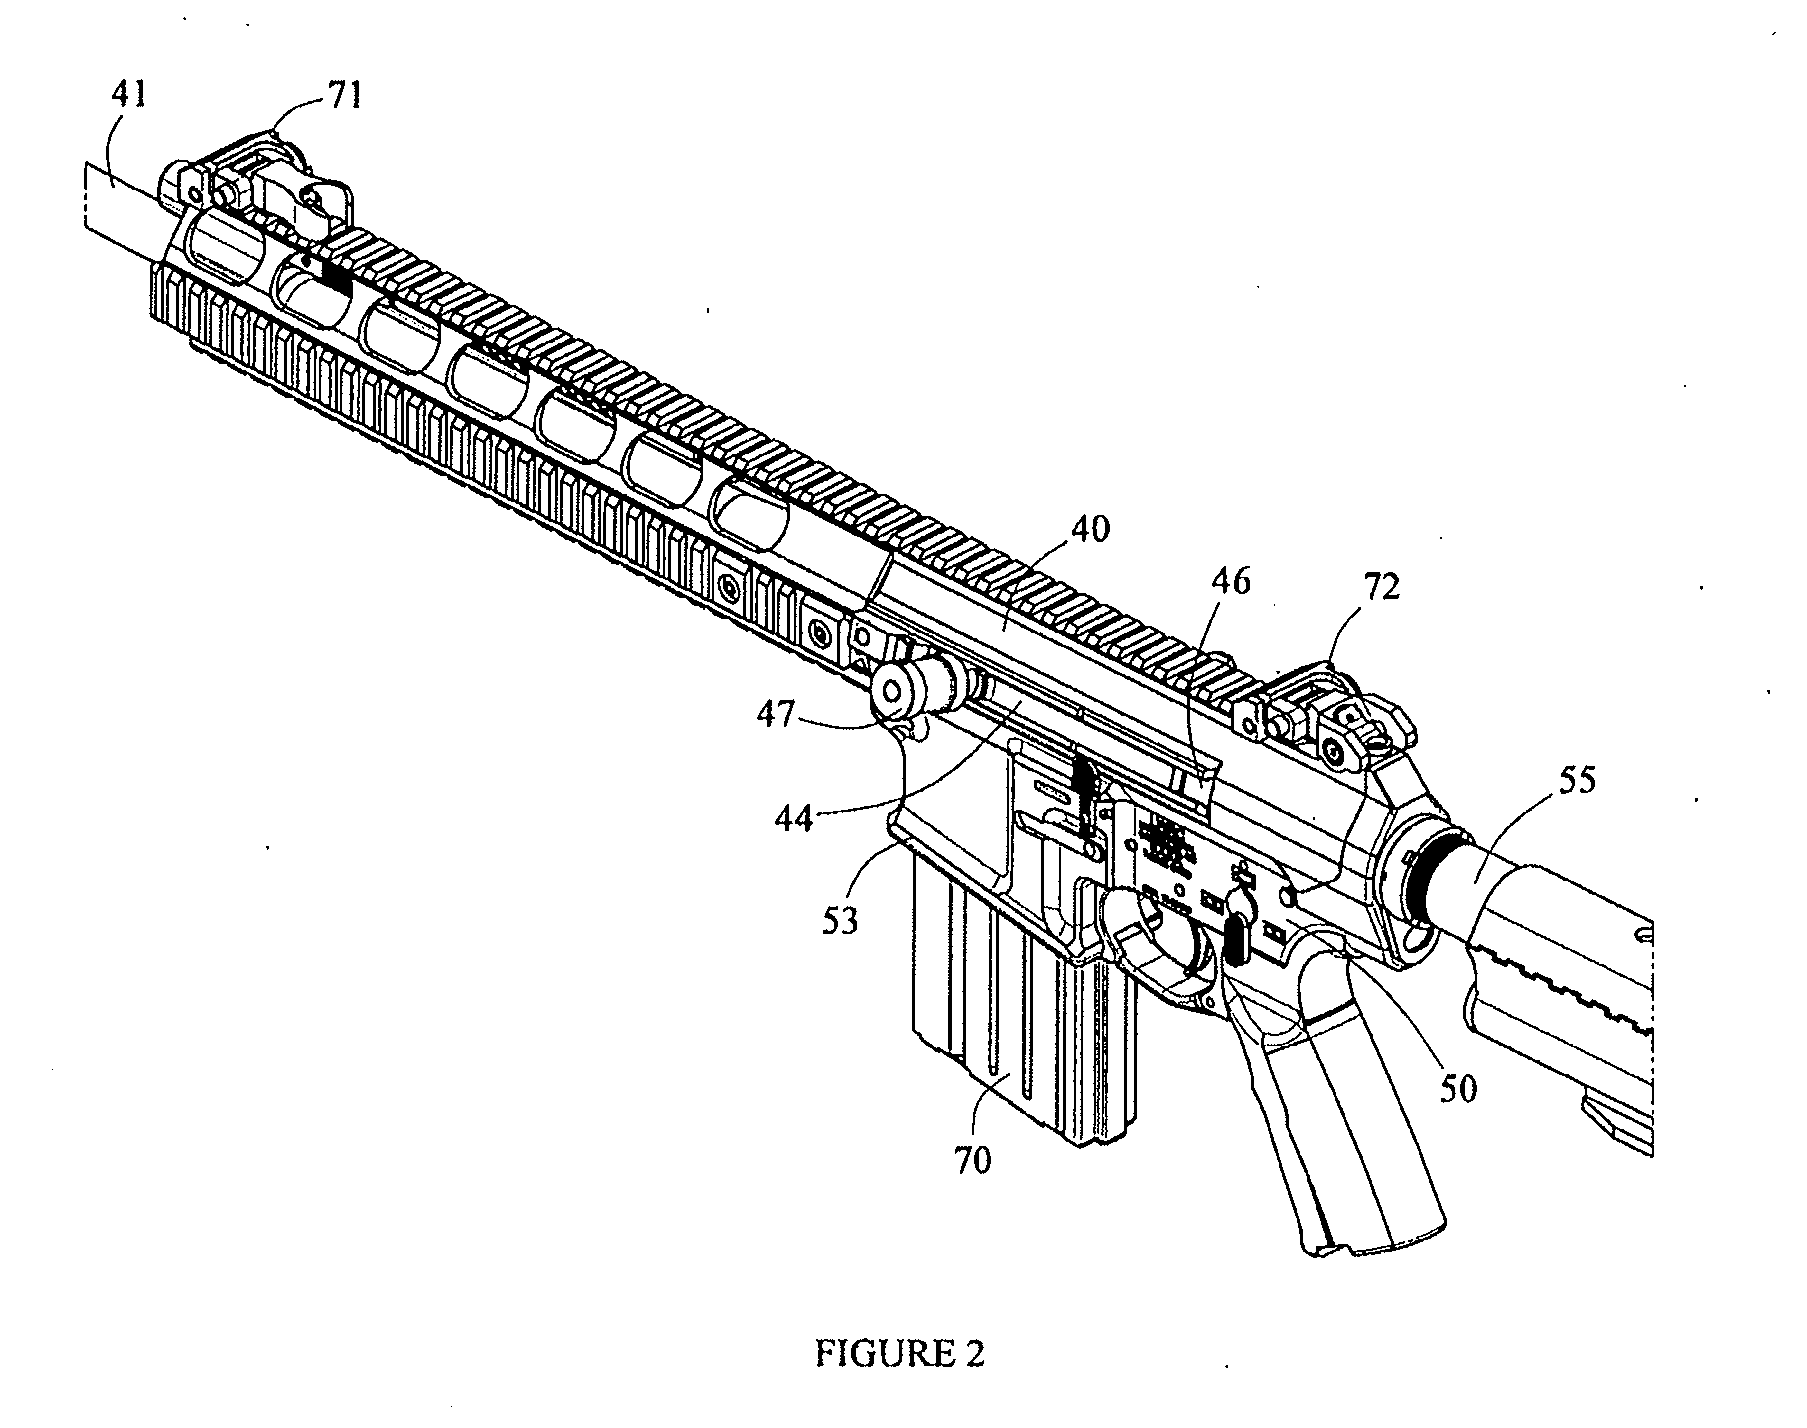 Receiver for an autoloading firearm